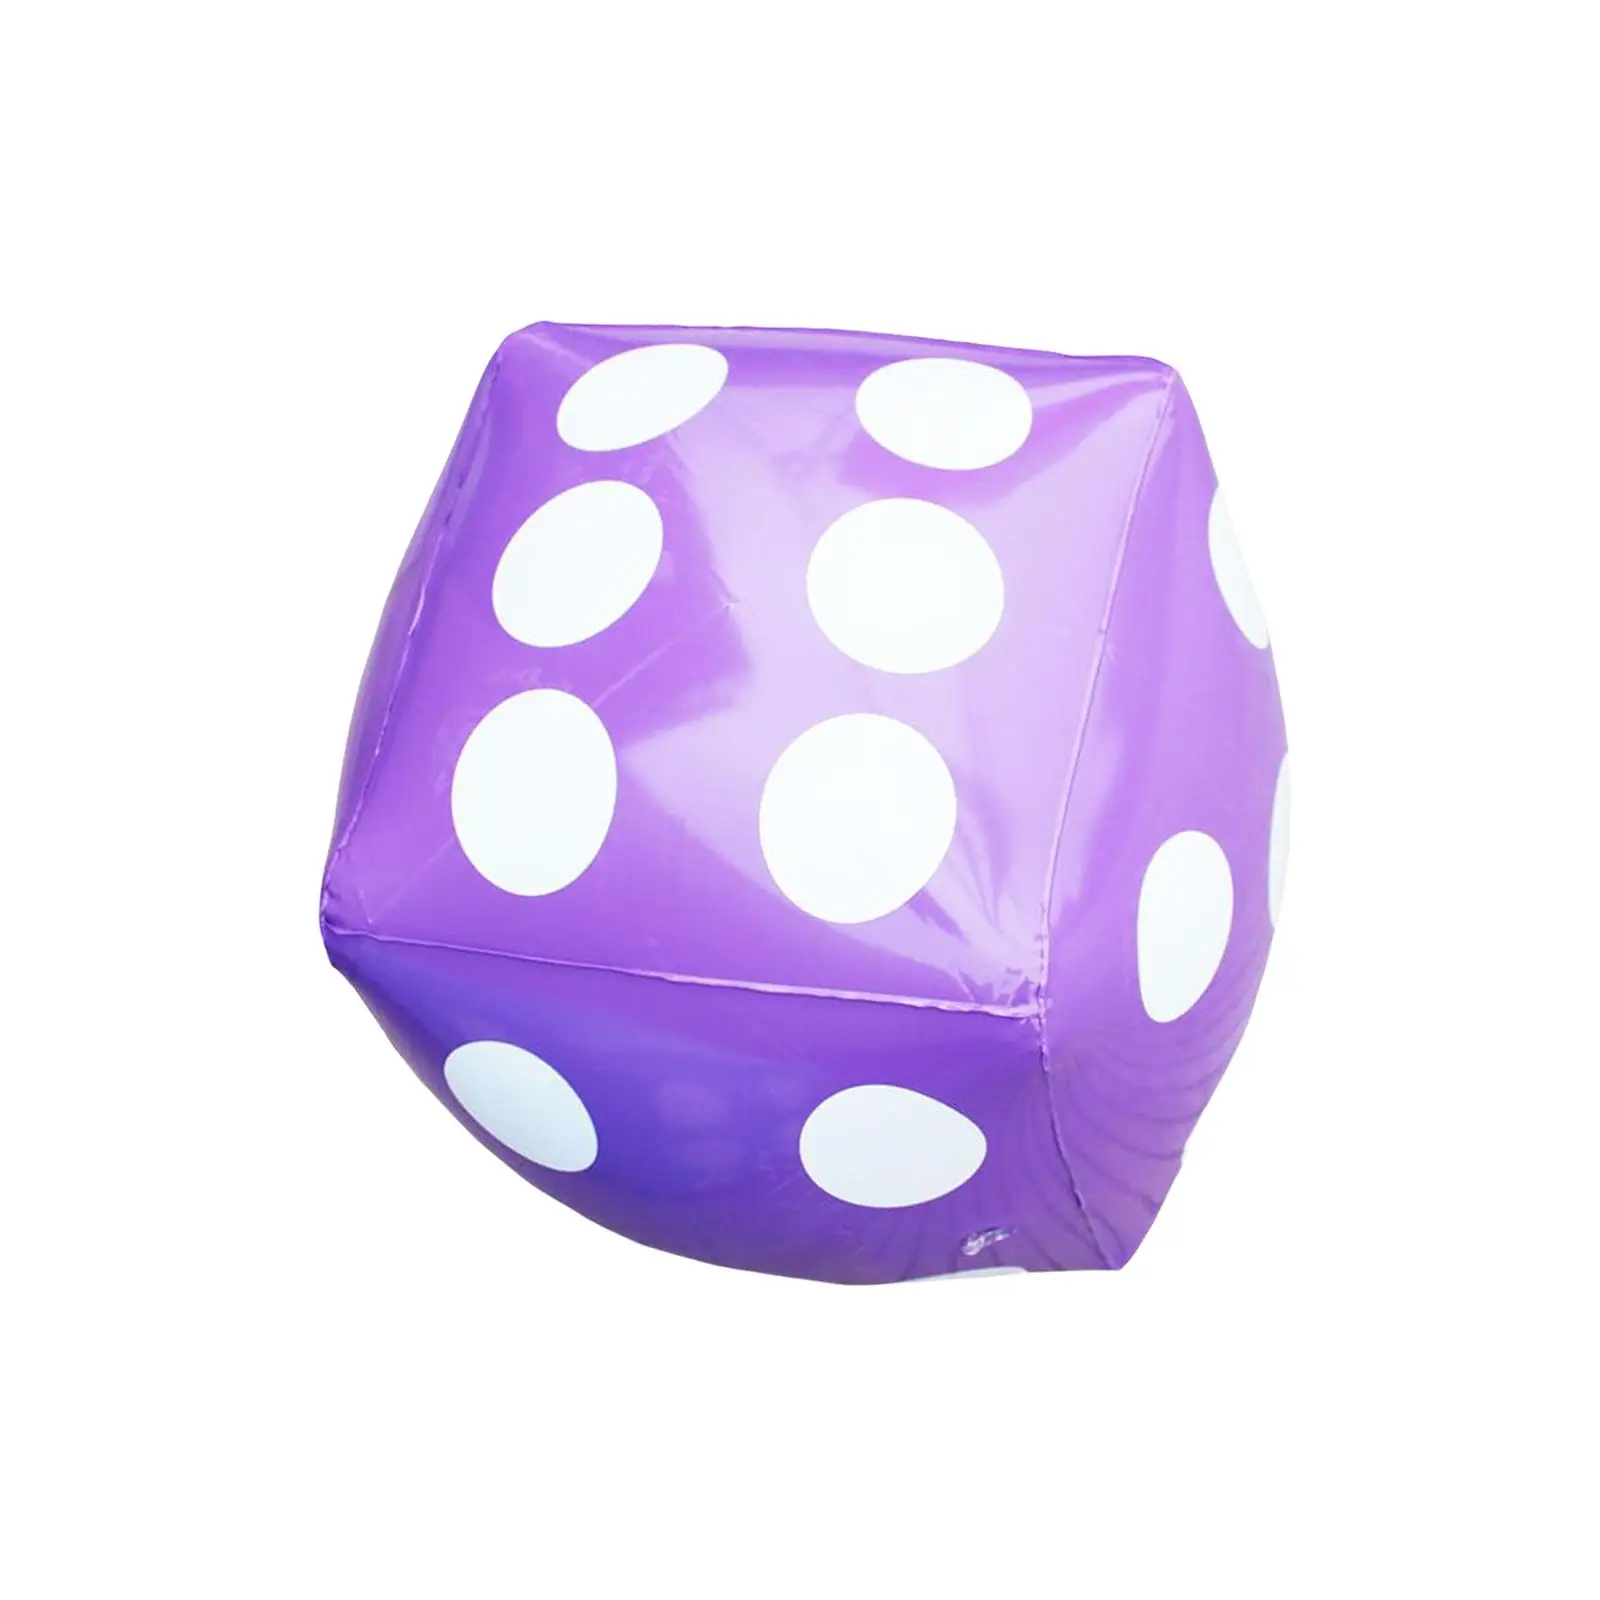 Giant Inflatable Dice Decoration Funny Jumbo Inflatable Dice Beach Inflatable Dice for Kids Toys Indoor Outdoor Bars Home Pools